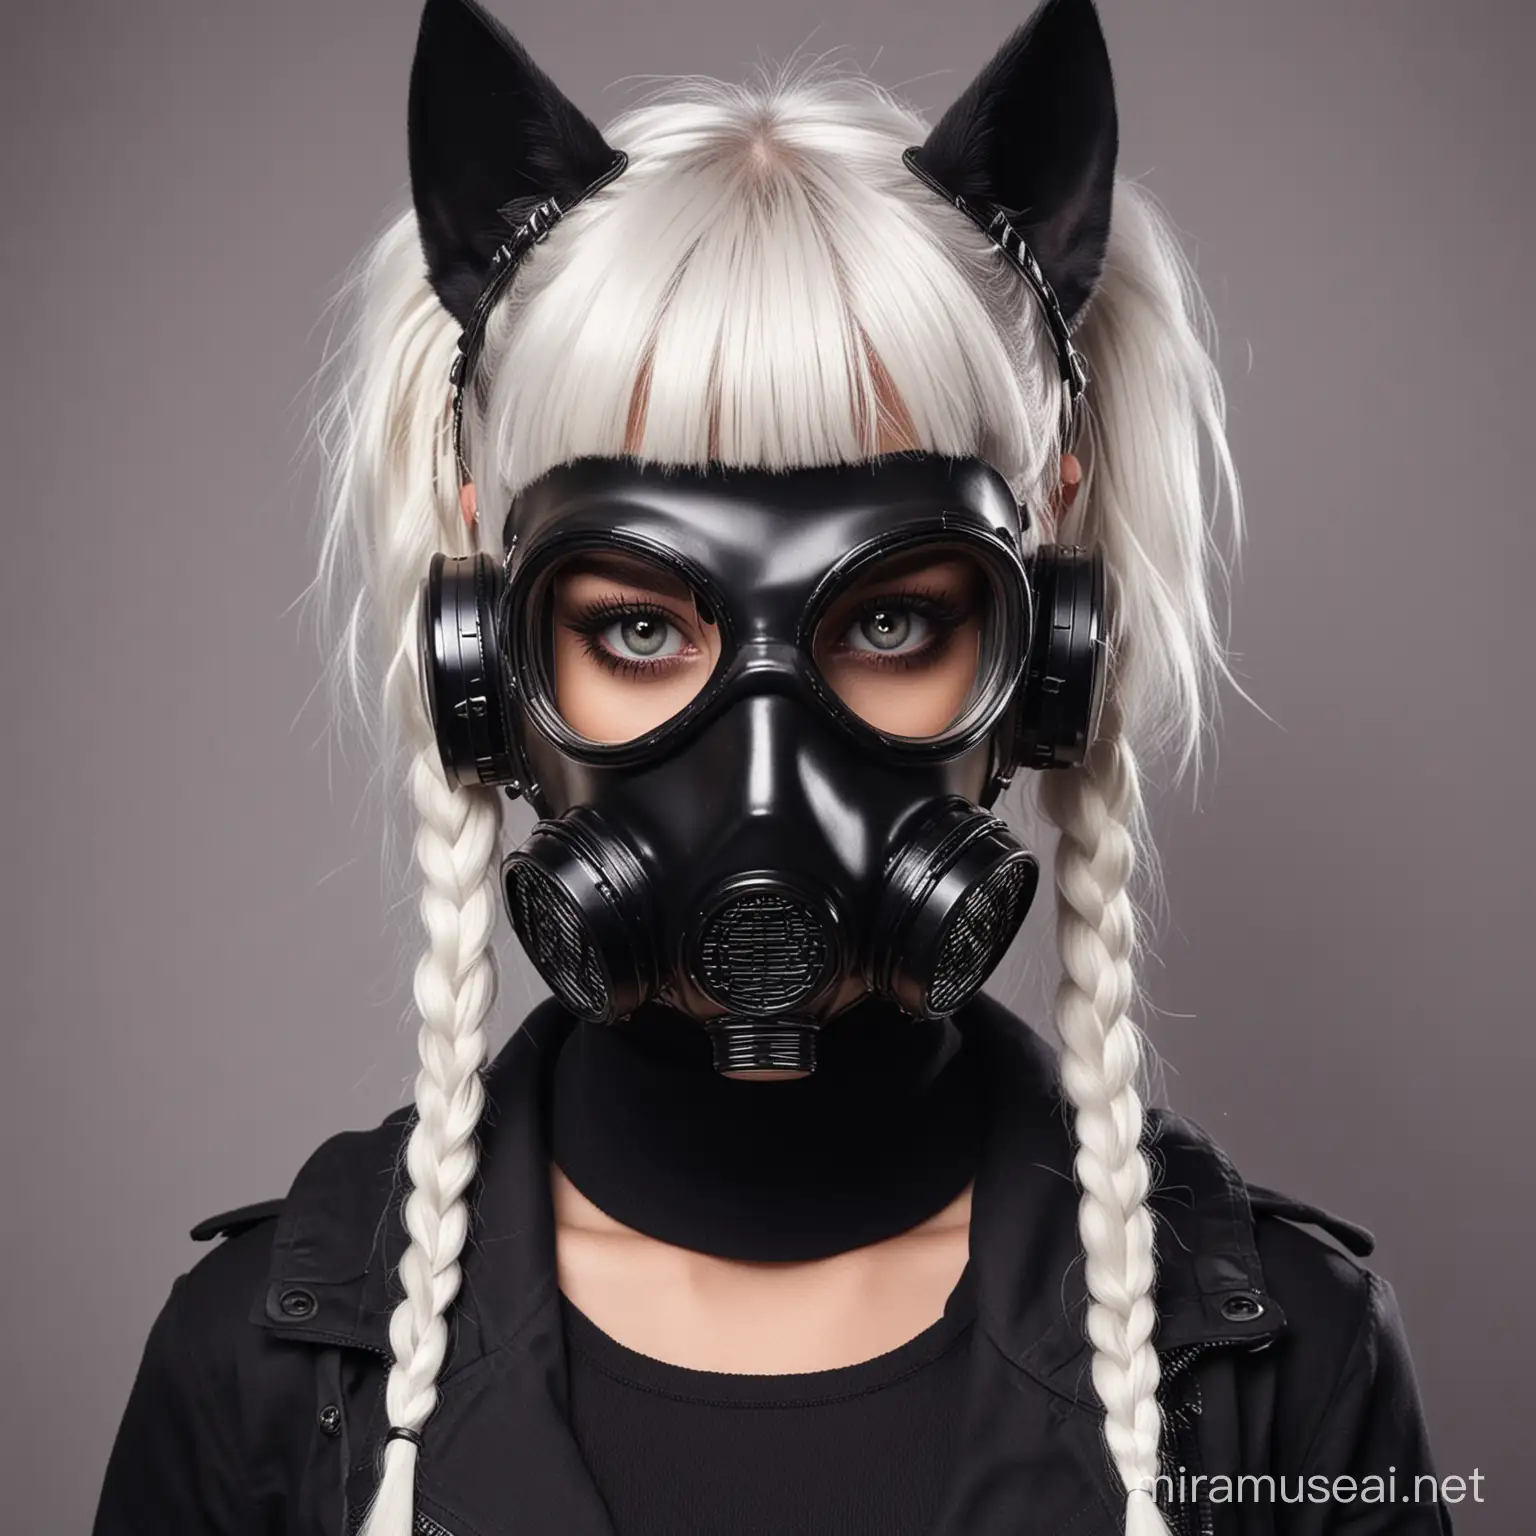 girl with white hair with bangs, little braids in hair, anubis black ears, wearing black gas mask, neon background, huge black eyes, dj style